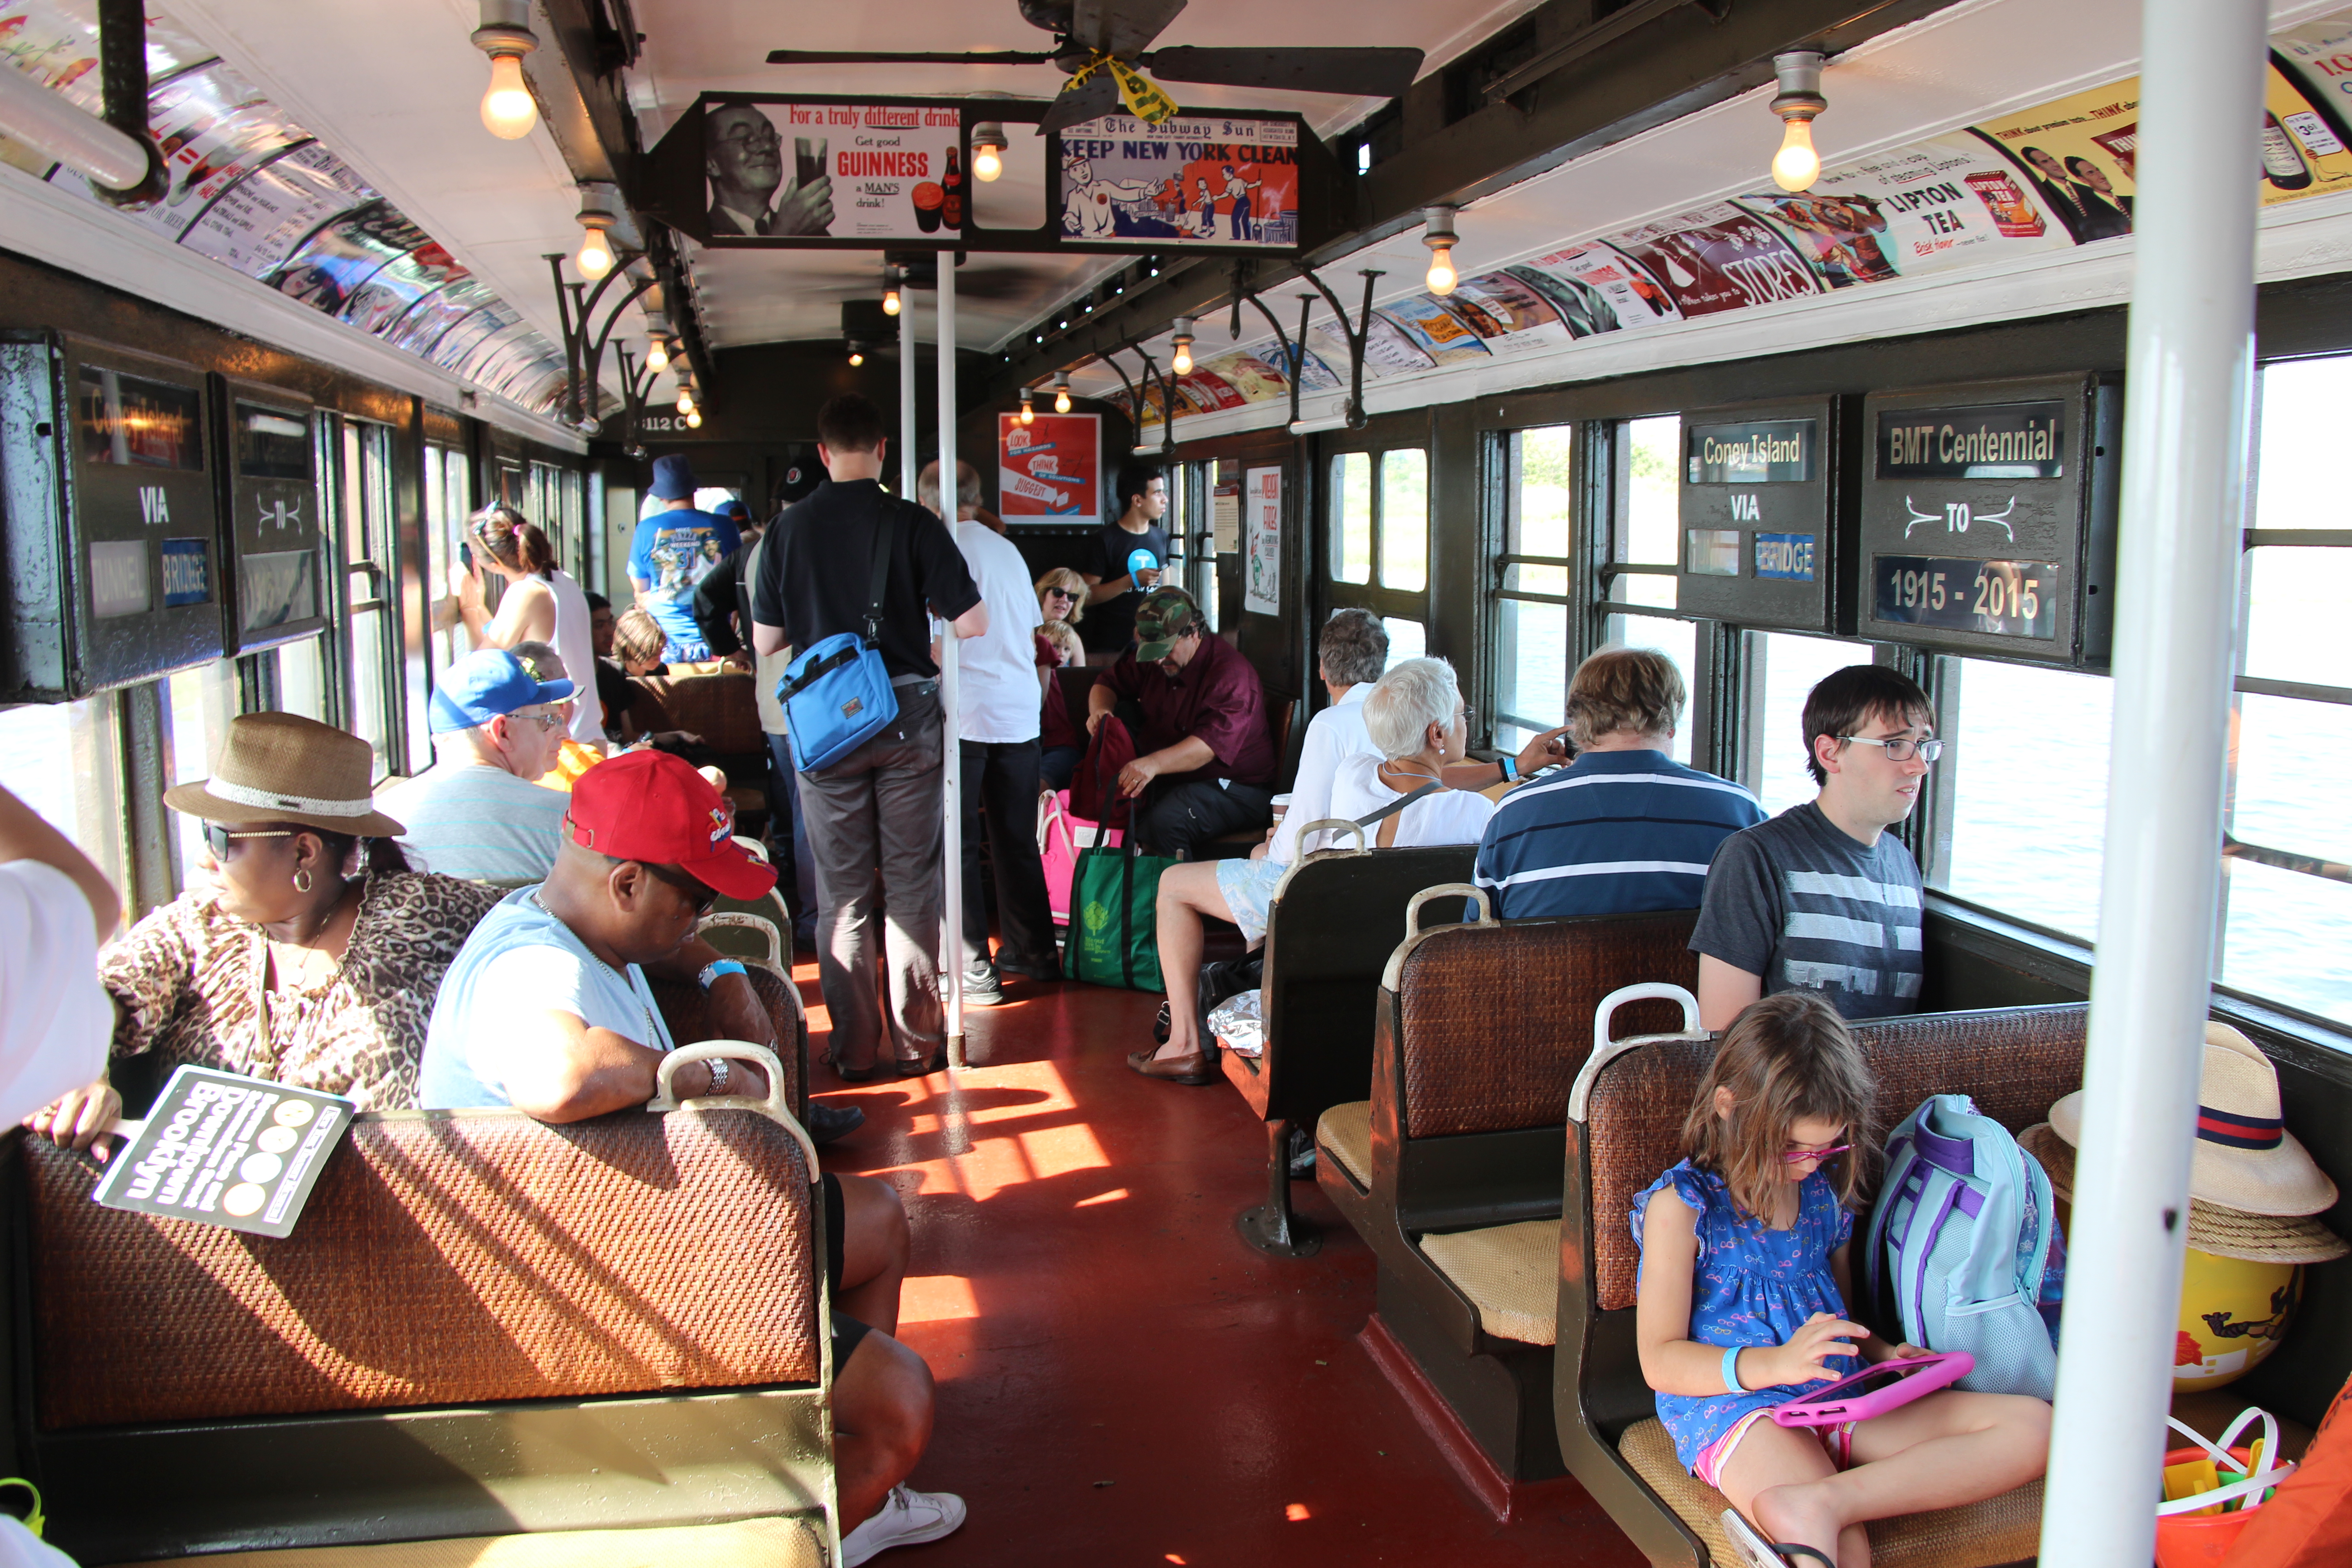 Riders onboard vintage train as it travels aboveground, sun streaming through windows.